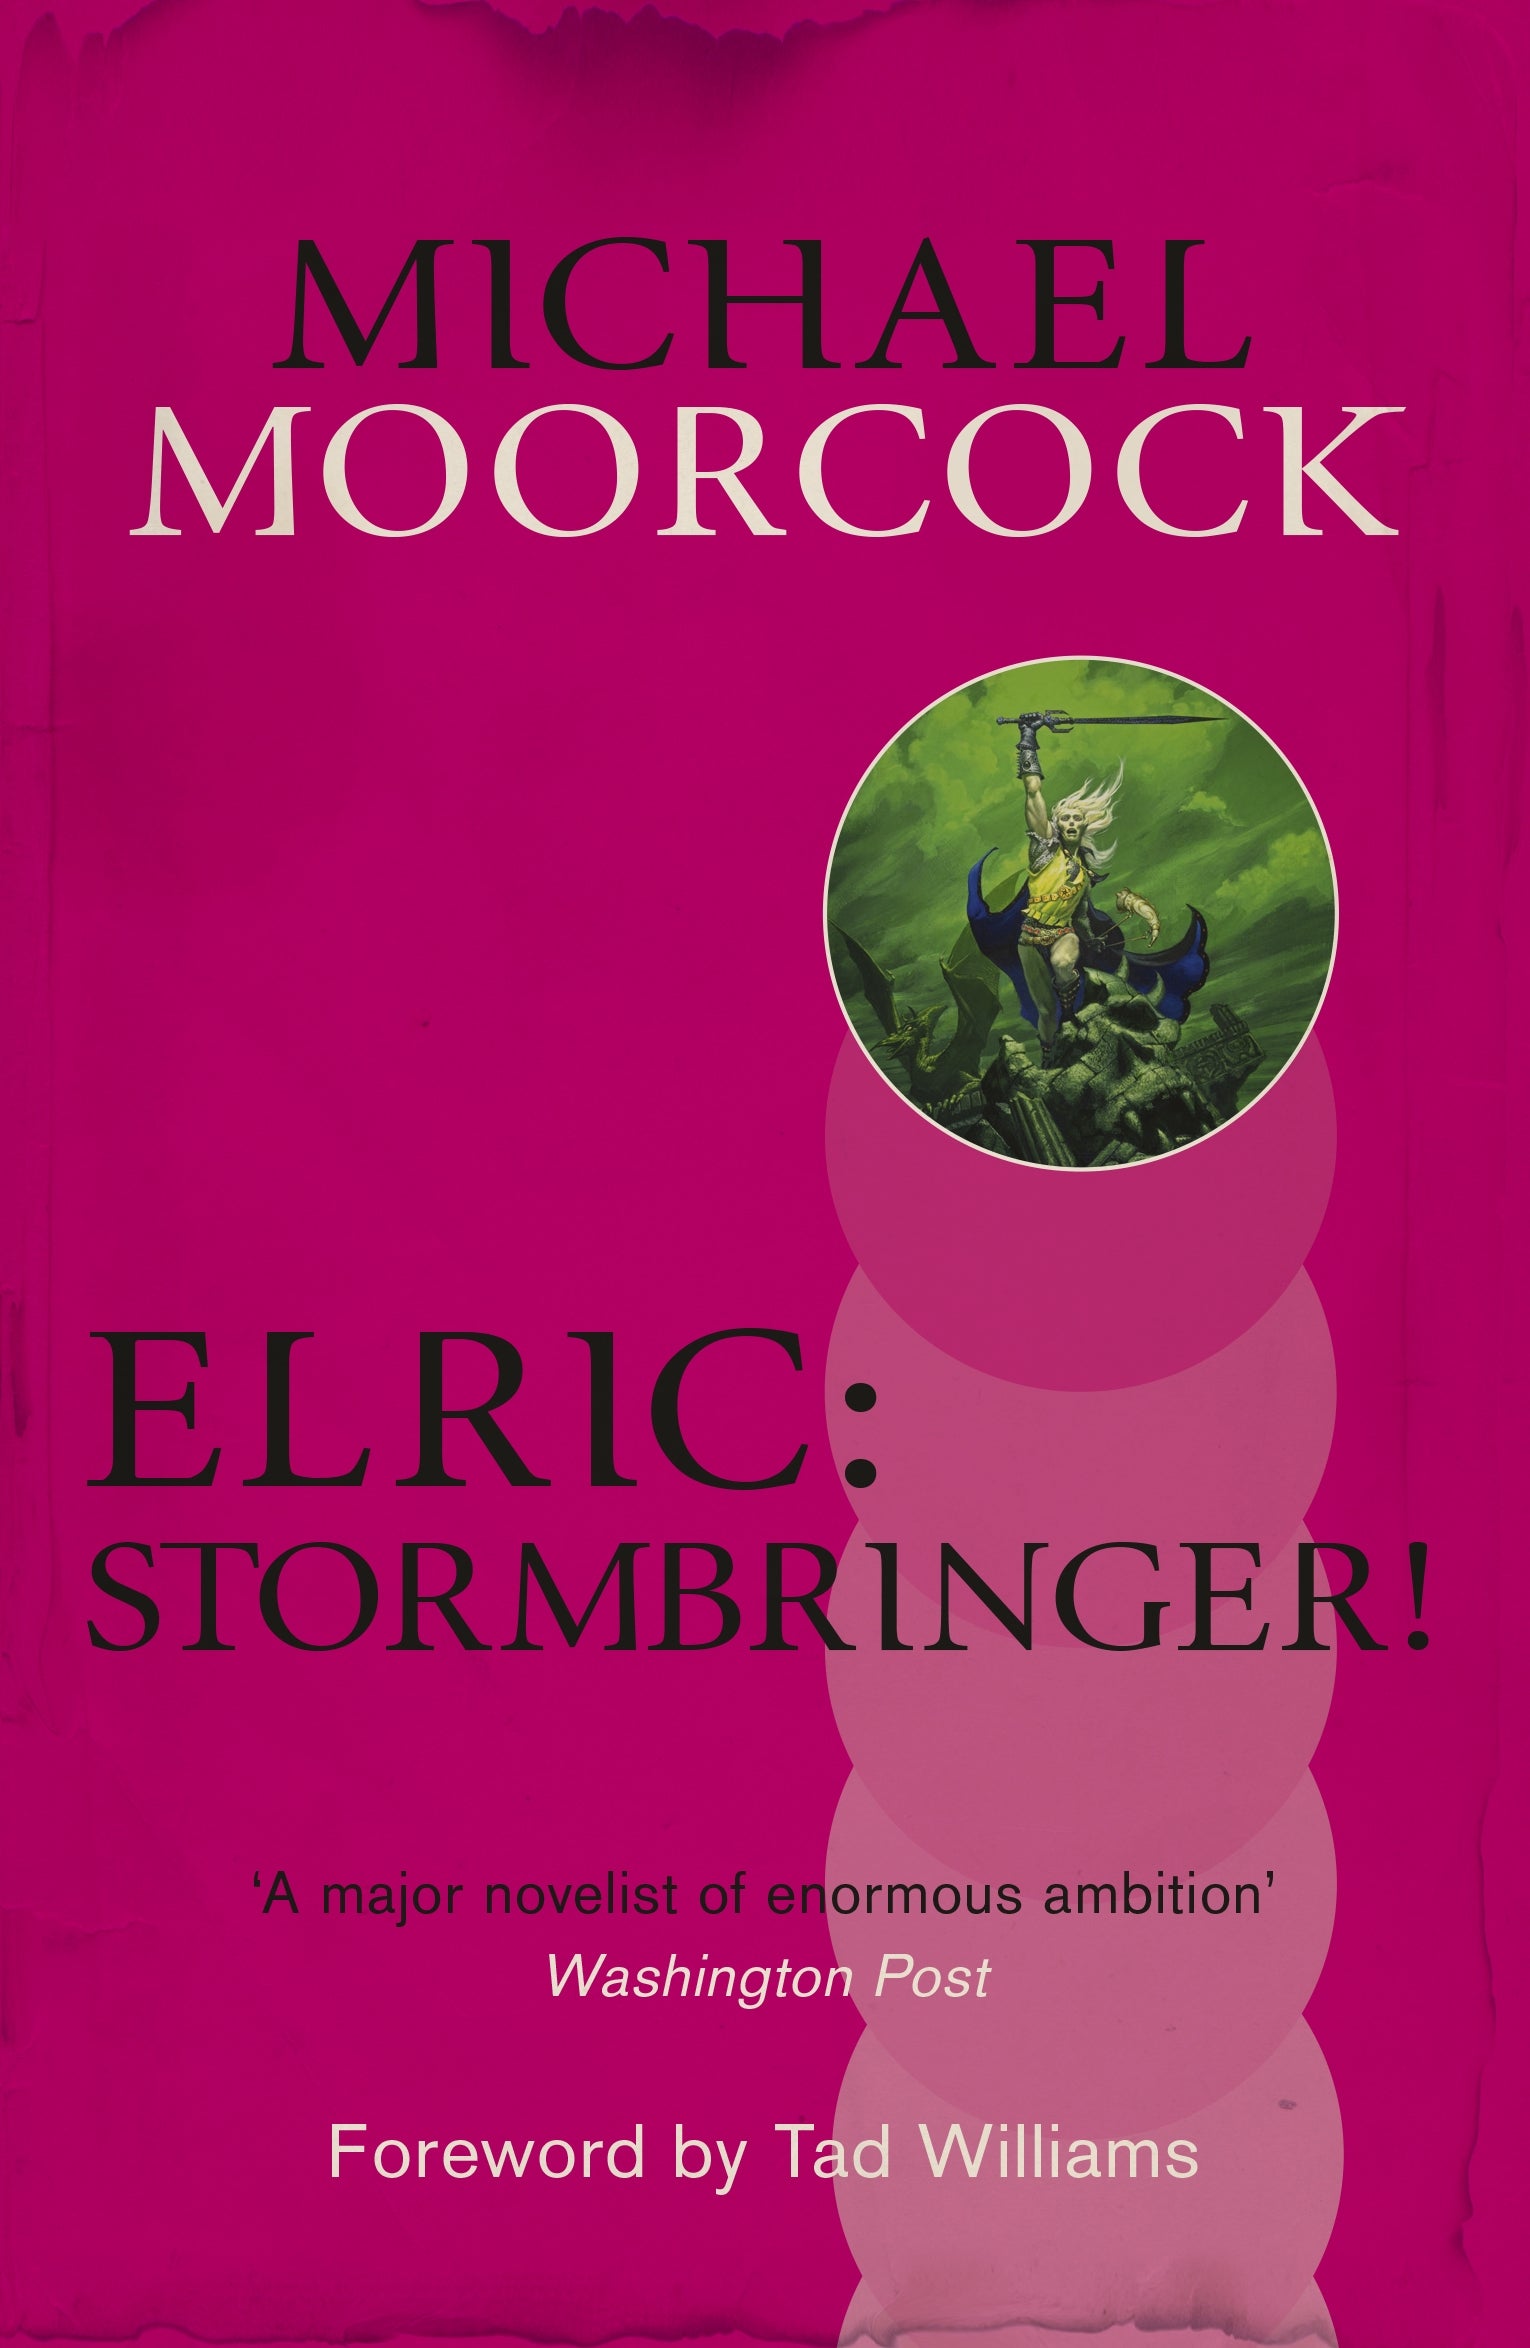 Elric: Stormbringer! by Michael Moorcock